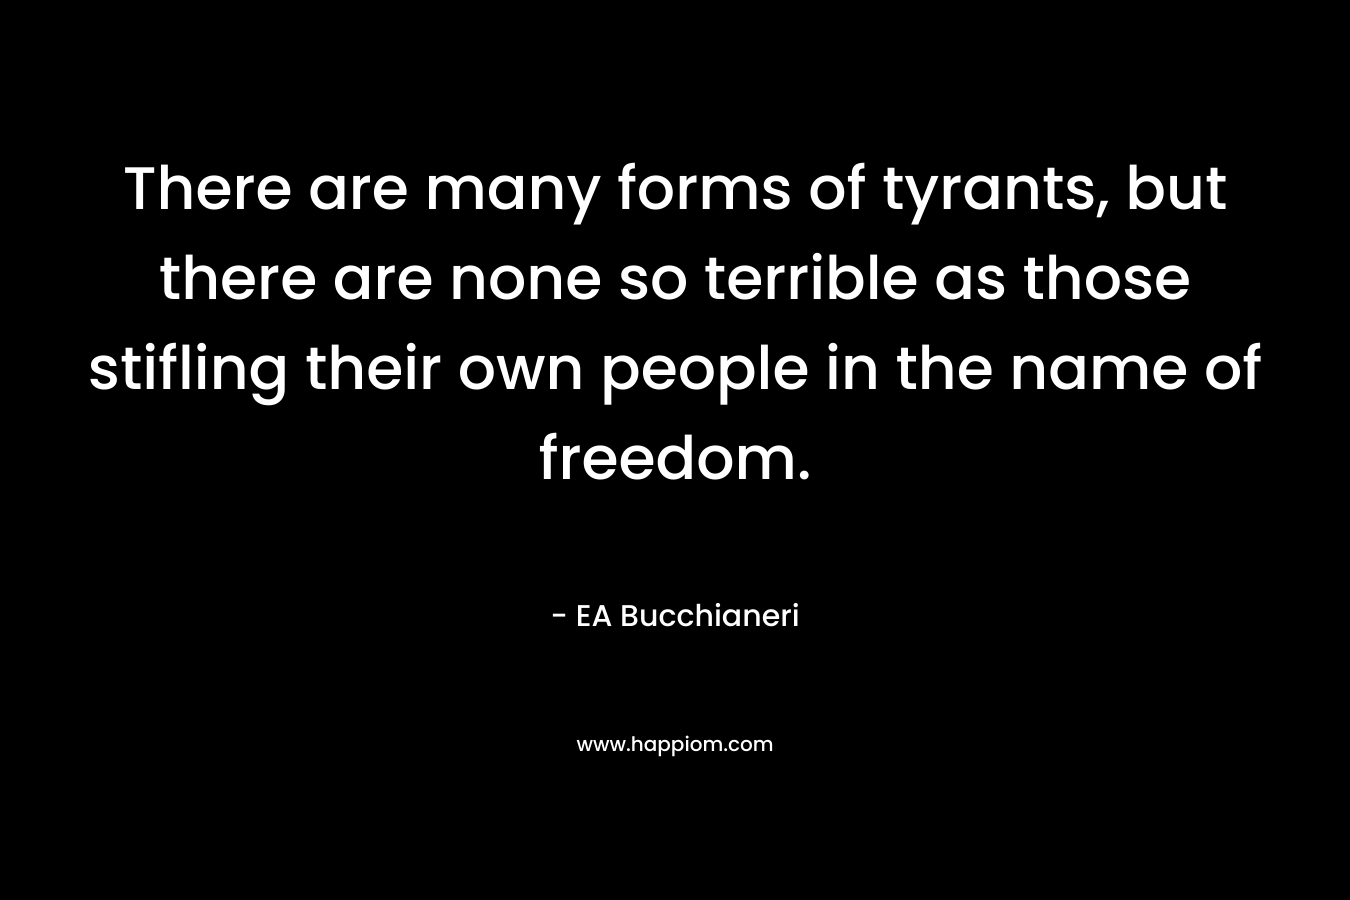 There are many forms of tyrants, but there are none so terrible as those stifling their own people in the name of freedom. – EA Bucchianeri